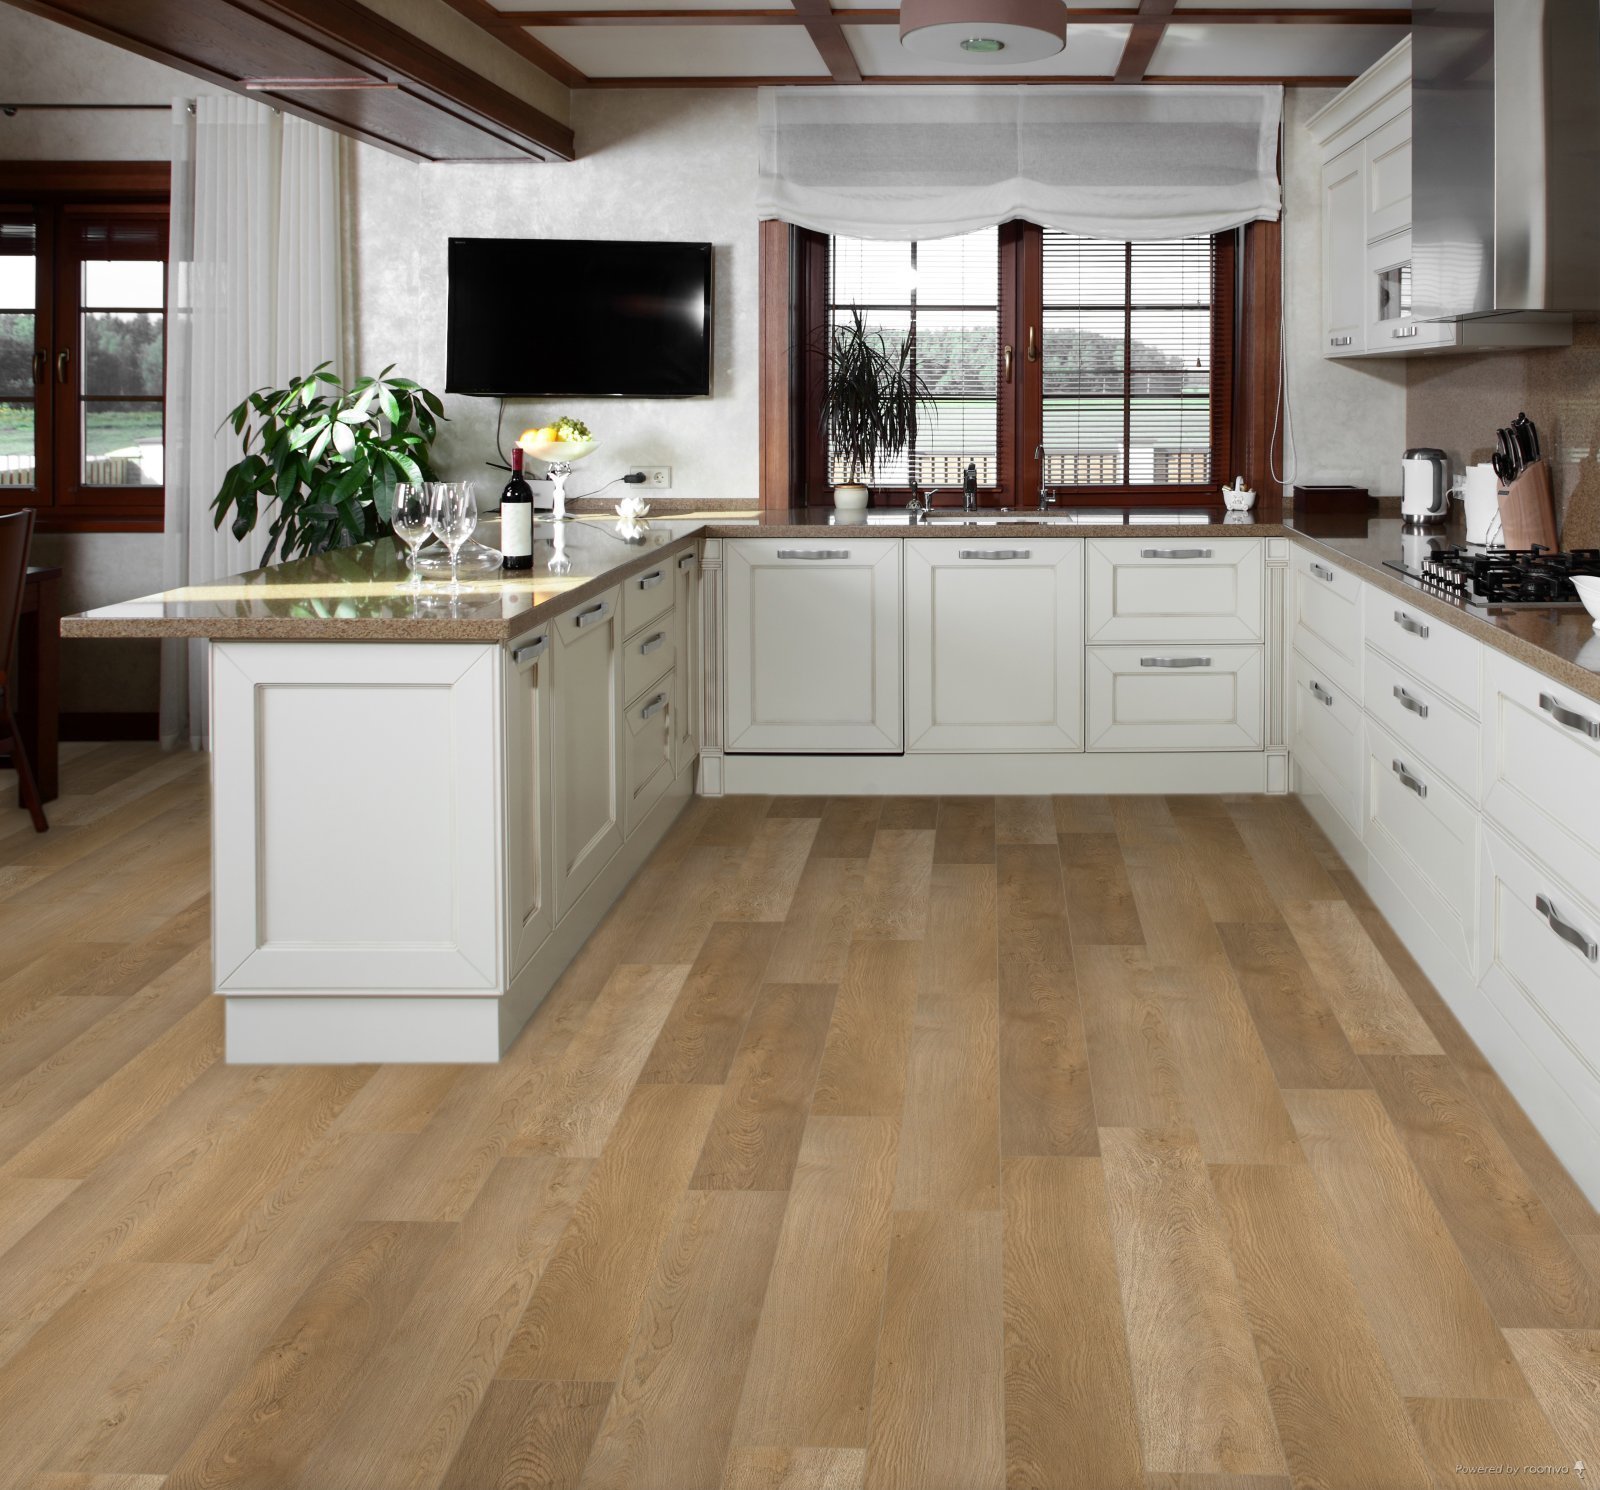 Horizen Flooring presents to you a picture of a quality wide plank Camden luxury vinyl plank. NovoCore Q Merengue collection features a wide range of colors & designs that will compliment any interior. Natural wood grain synchronized surface allow for an authentic hardwood look & feel. This collection features a 0.3″ / 7.5 mm overall thickness and a durable 22 mil / 0.55 mm wear layer for residential and commercial applications.